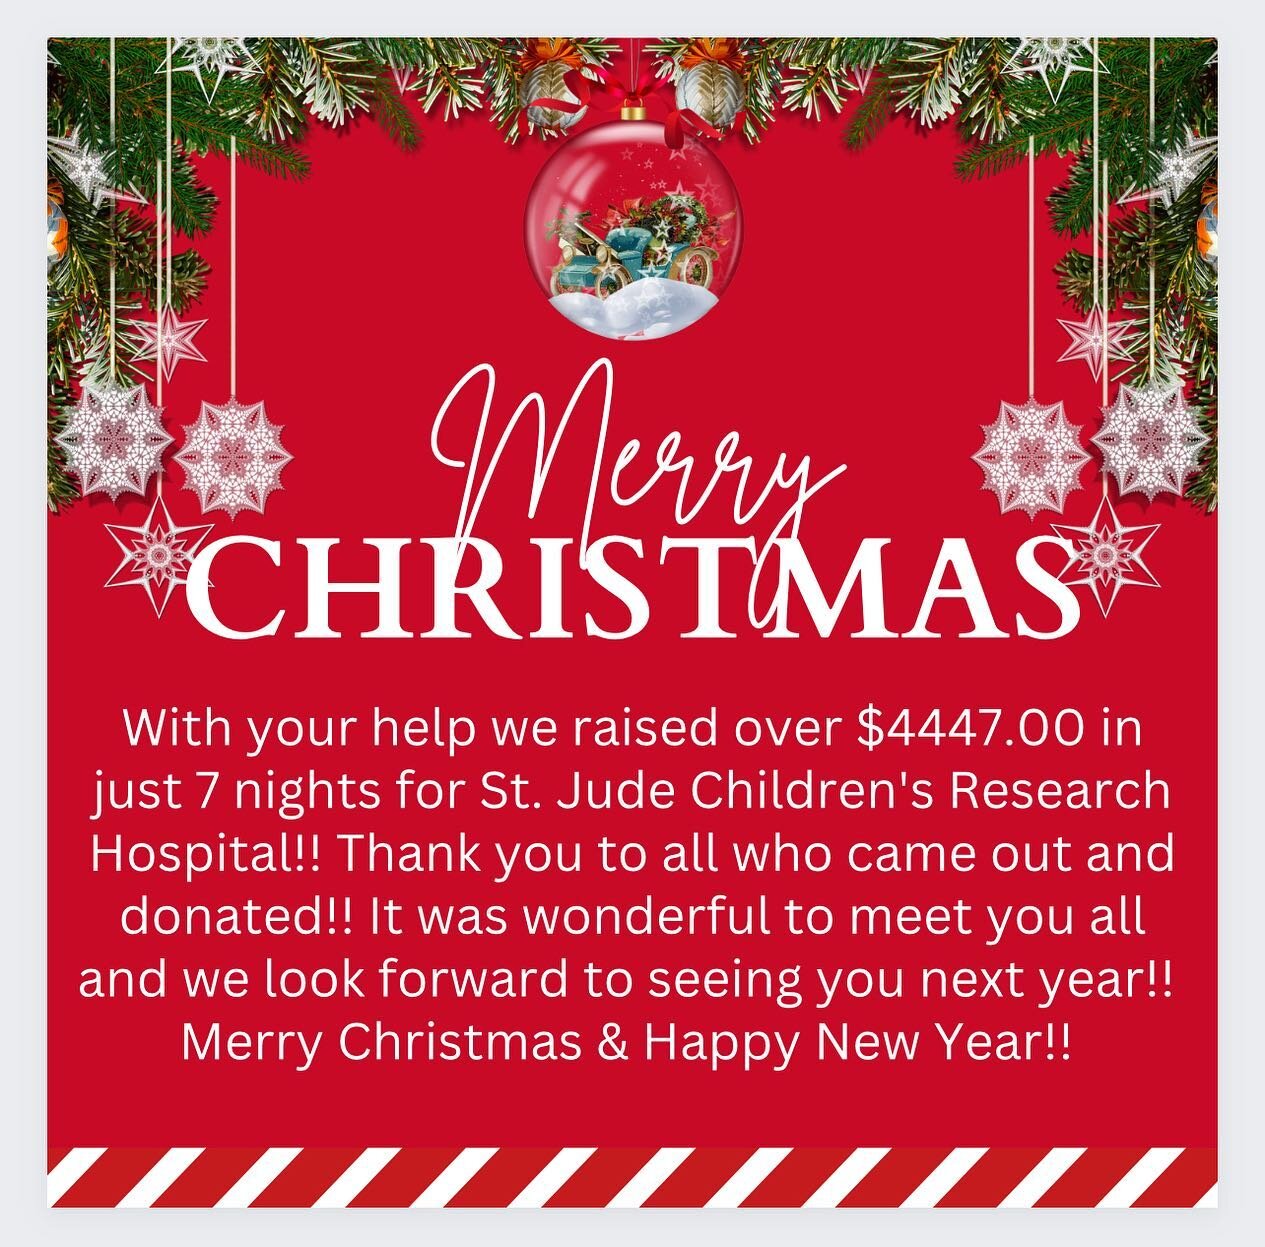 That&rsquo;s a wrap!! 
With your help we raised over $4447.00 in just 7 nights for St. Jude Children&rsquo;s Research Hospital!! Thank you to all who came out and donated!! It was wonderful to meet you all and we look forward to seeing you next year!